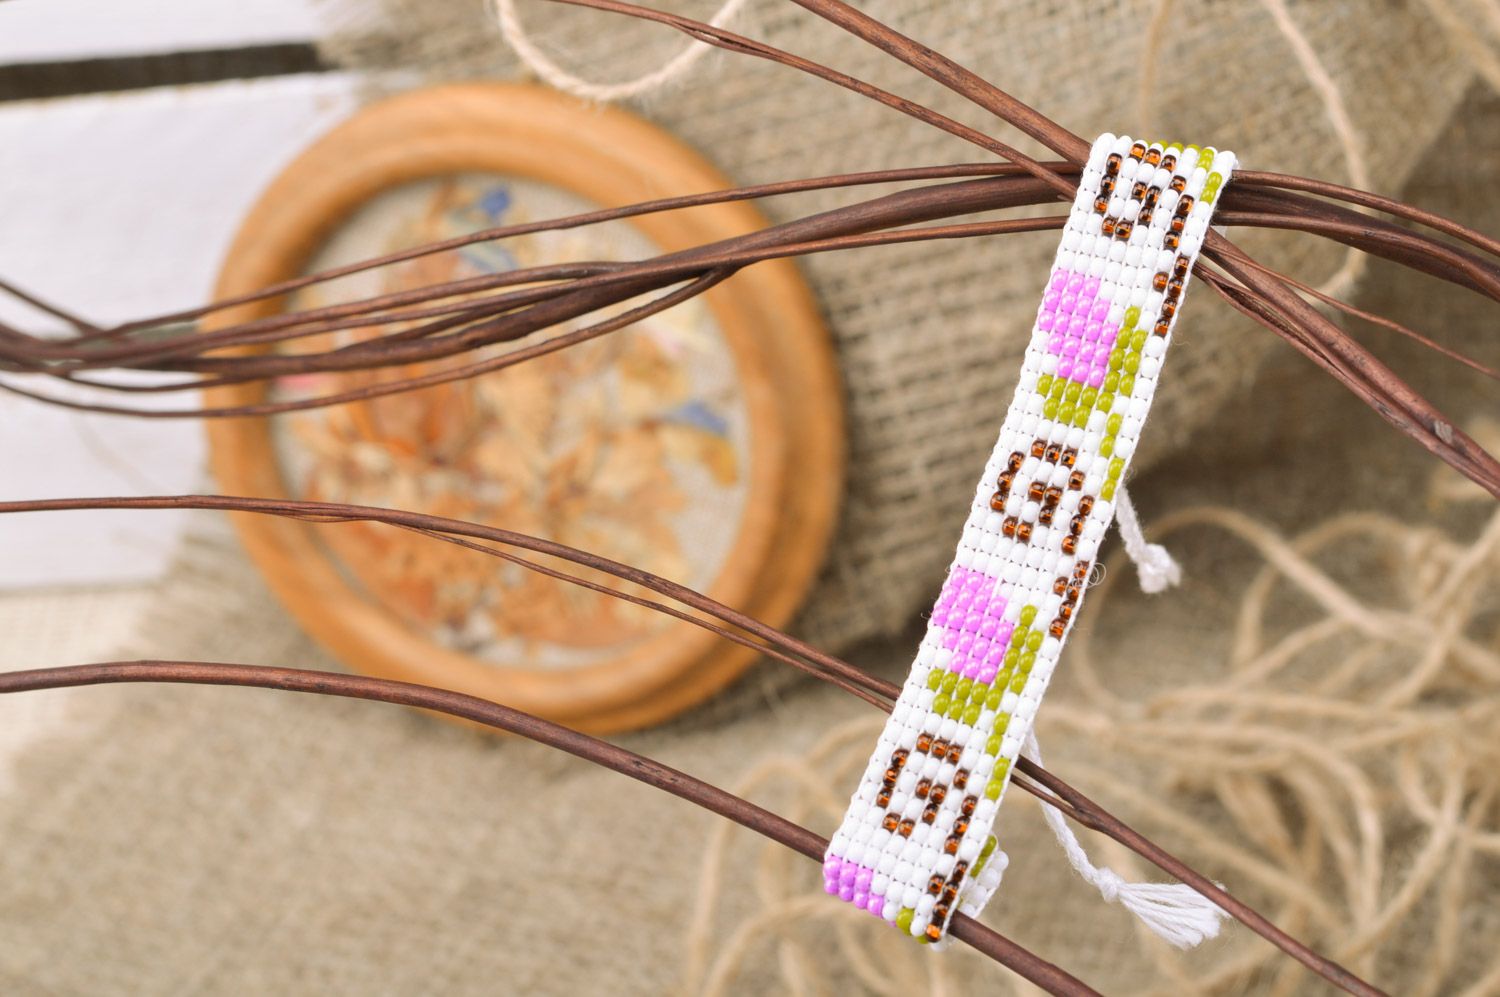 Stylish handmade women's wrist bracelet woven of beads and threads of light color with flower pattern photo 1